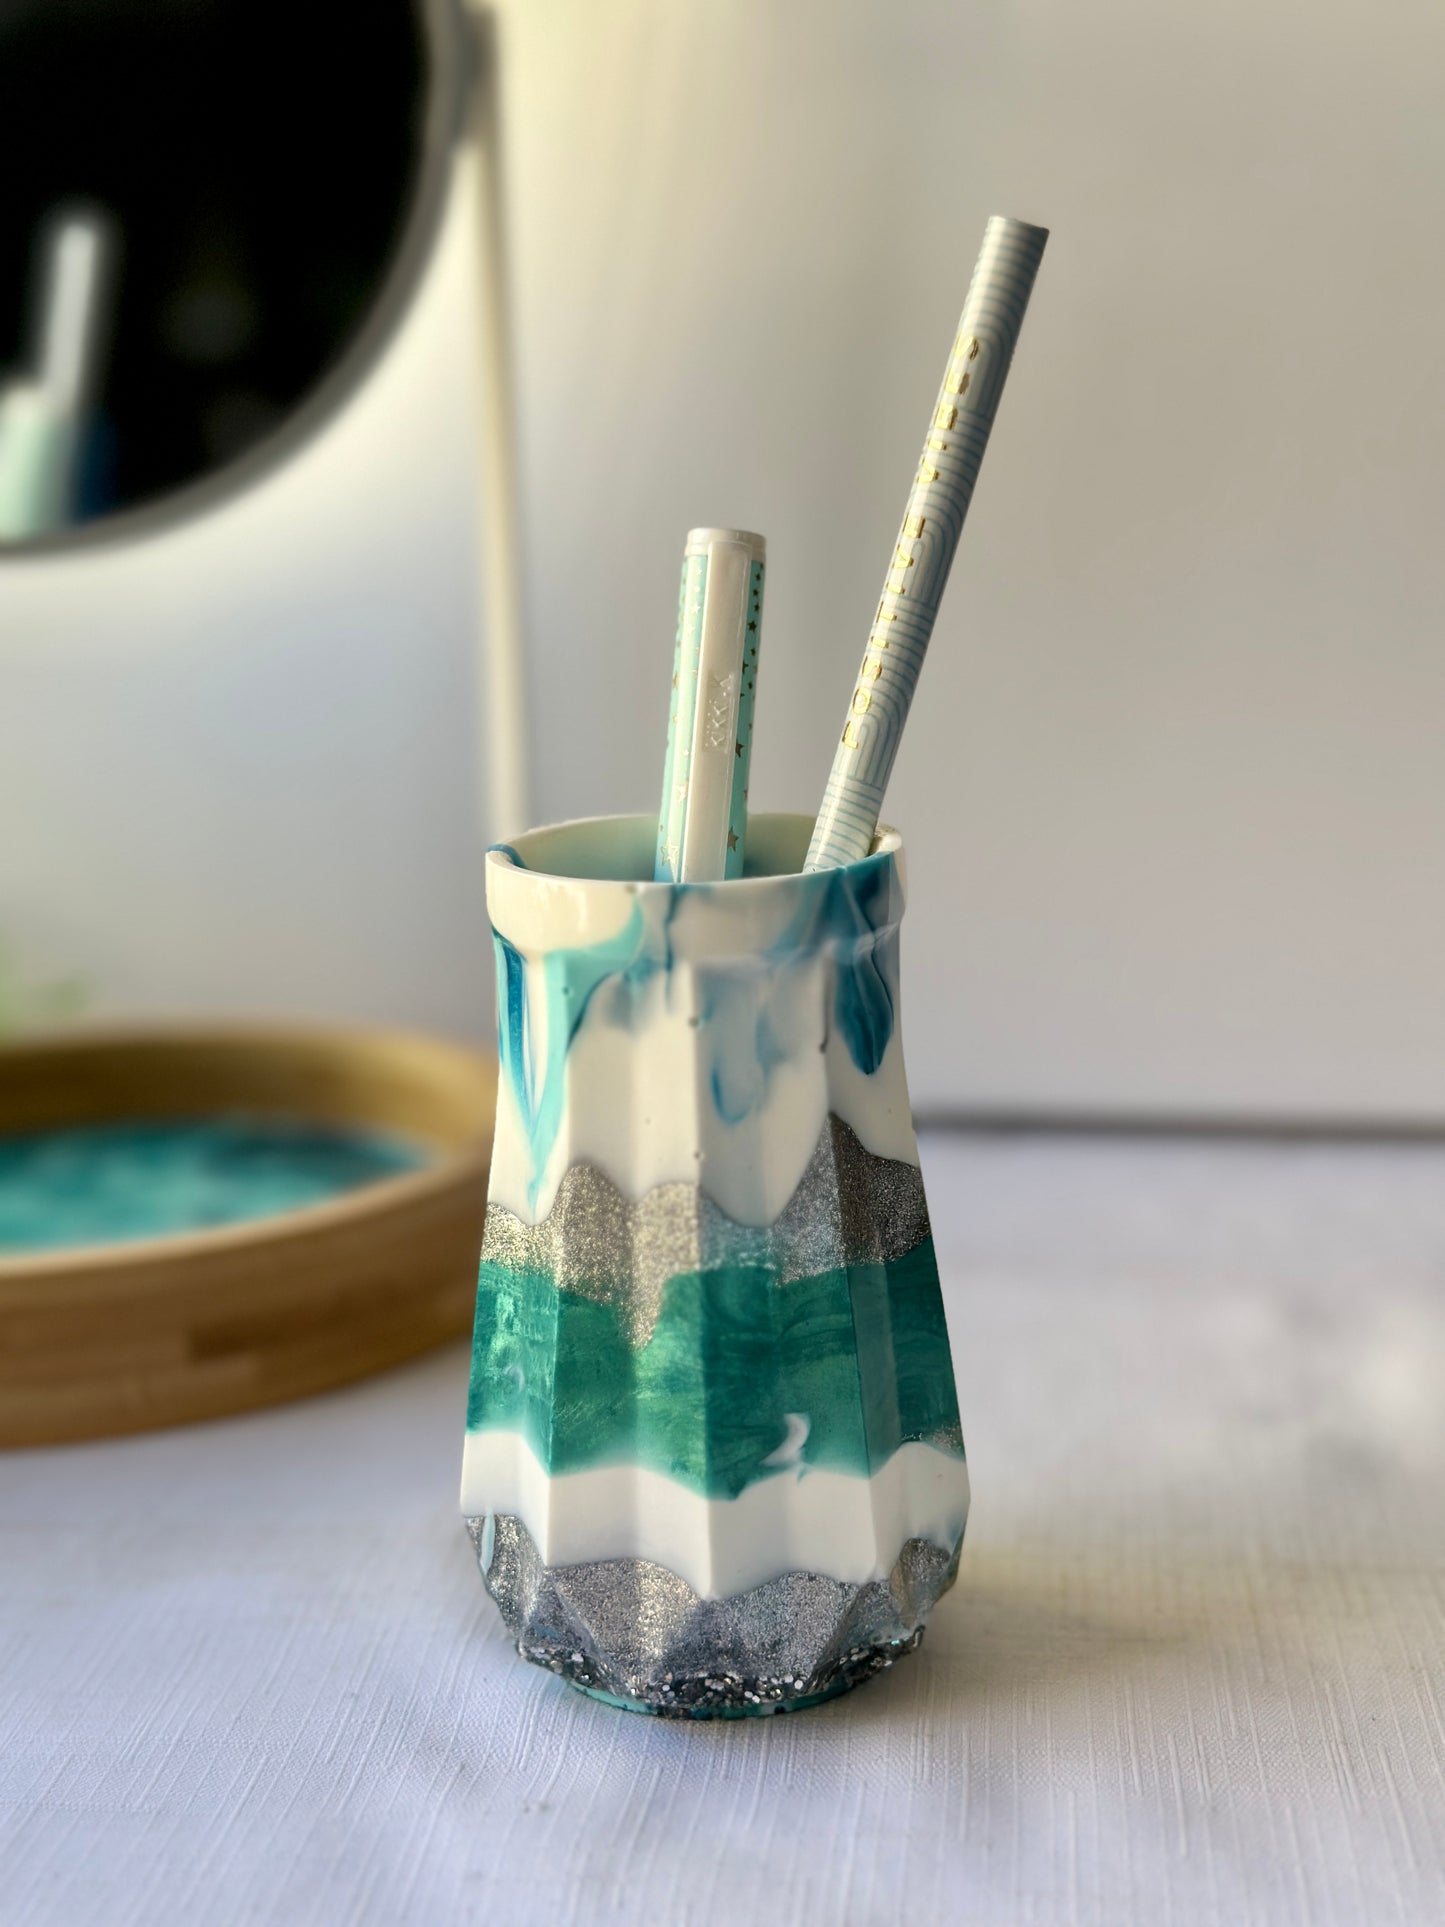 RESIN VASE - white, blue and teal with silver glitter